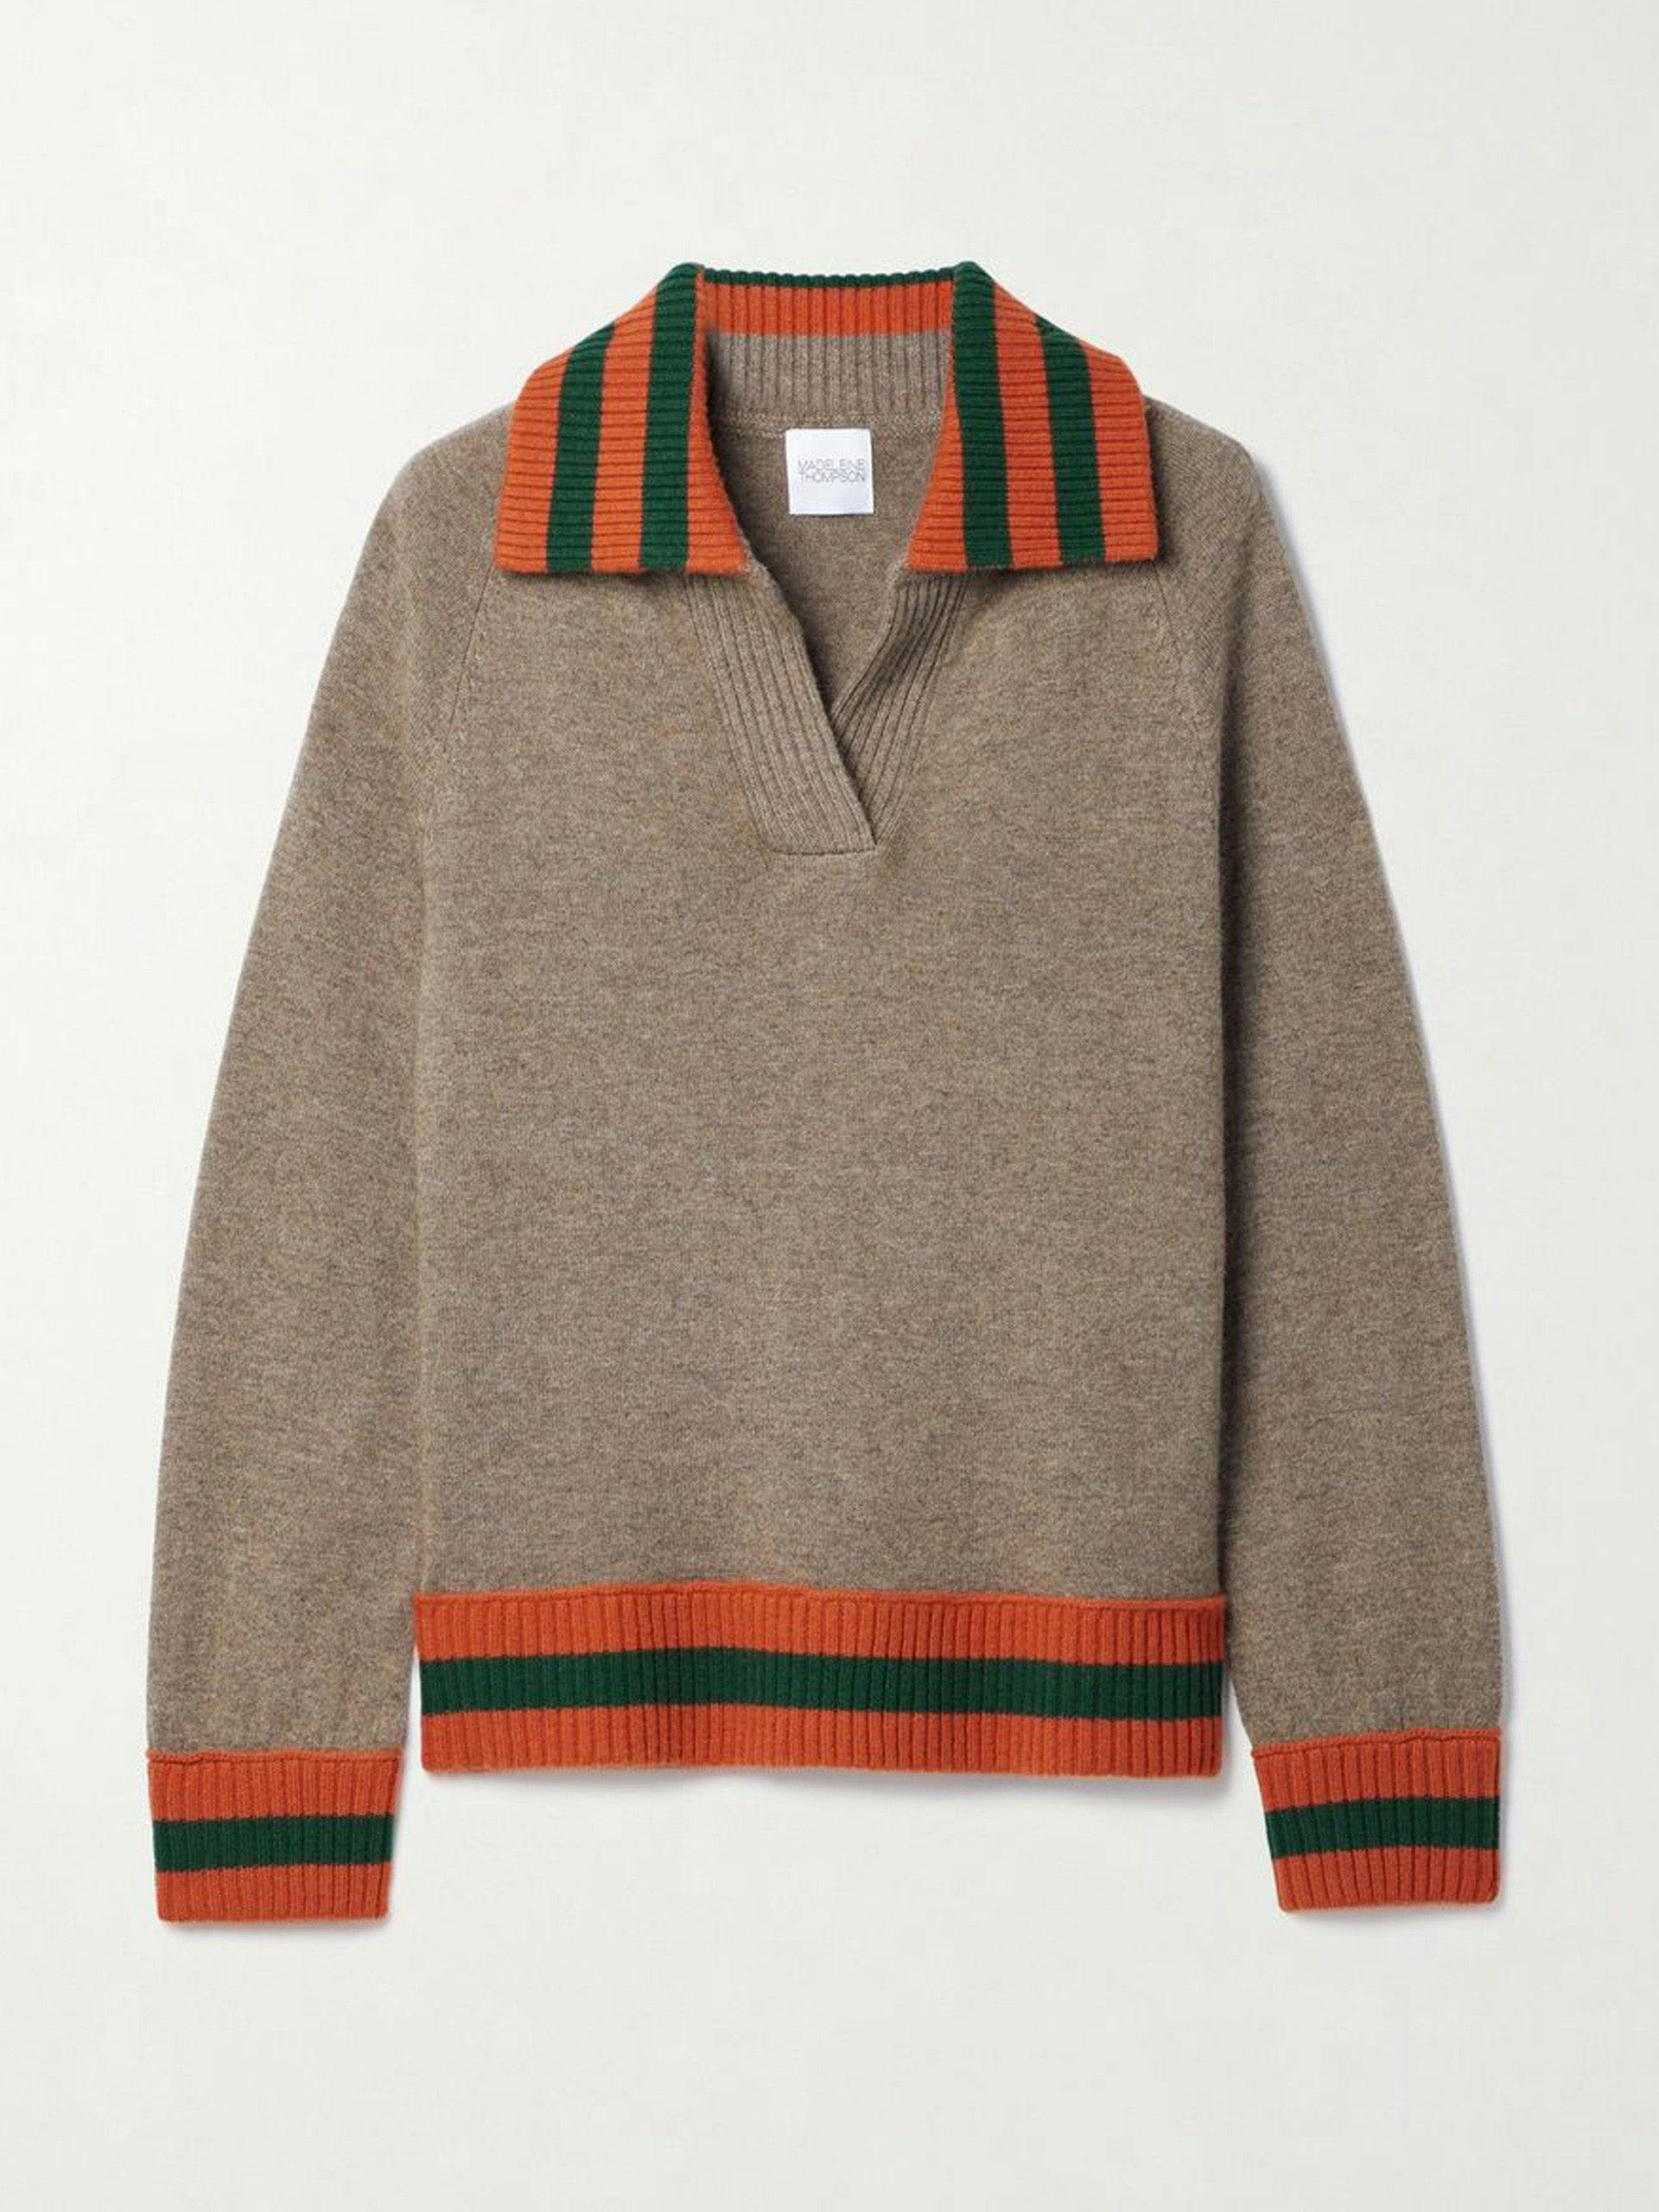 Brown jumper with orange and green stripes